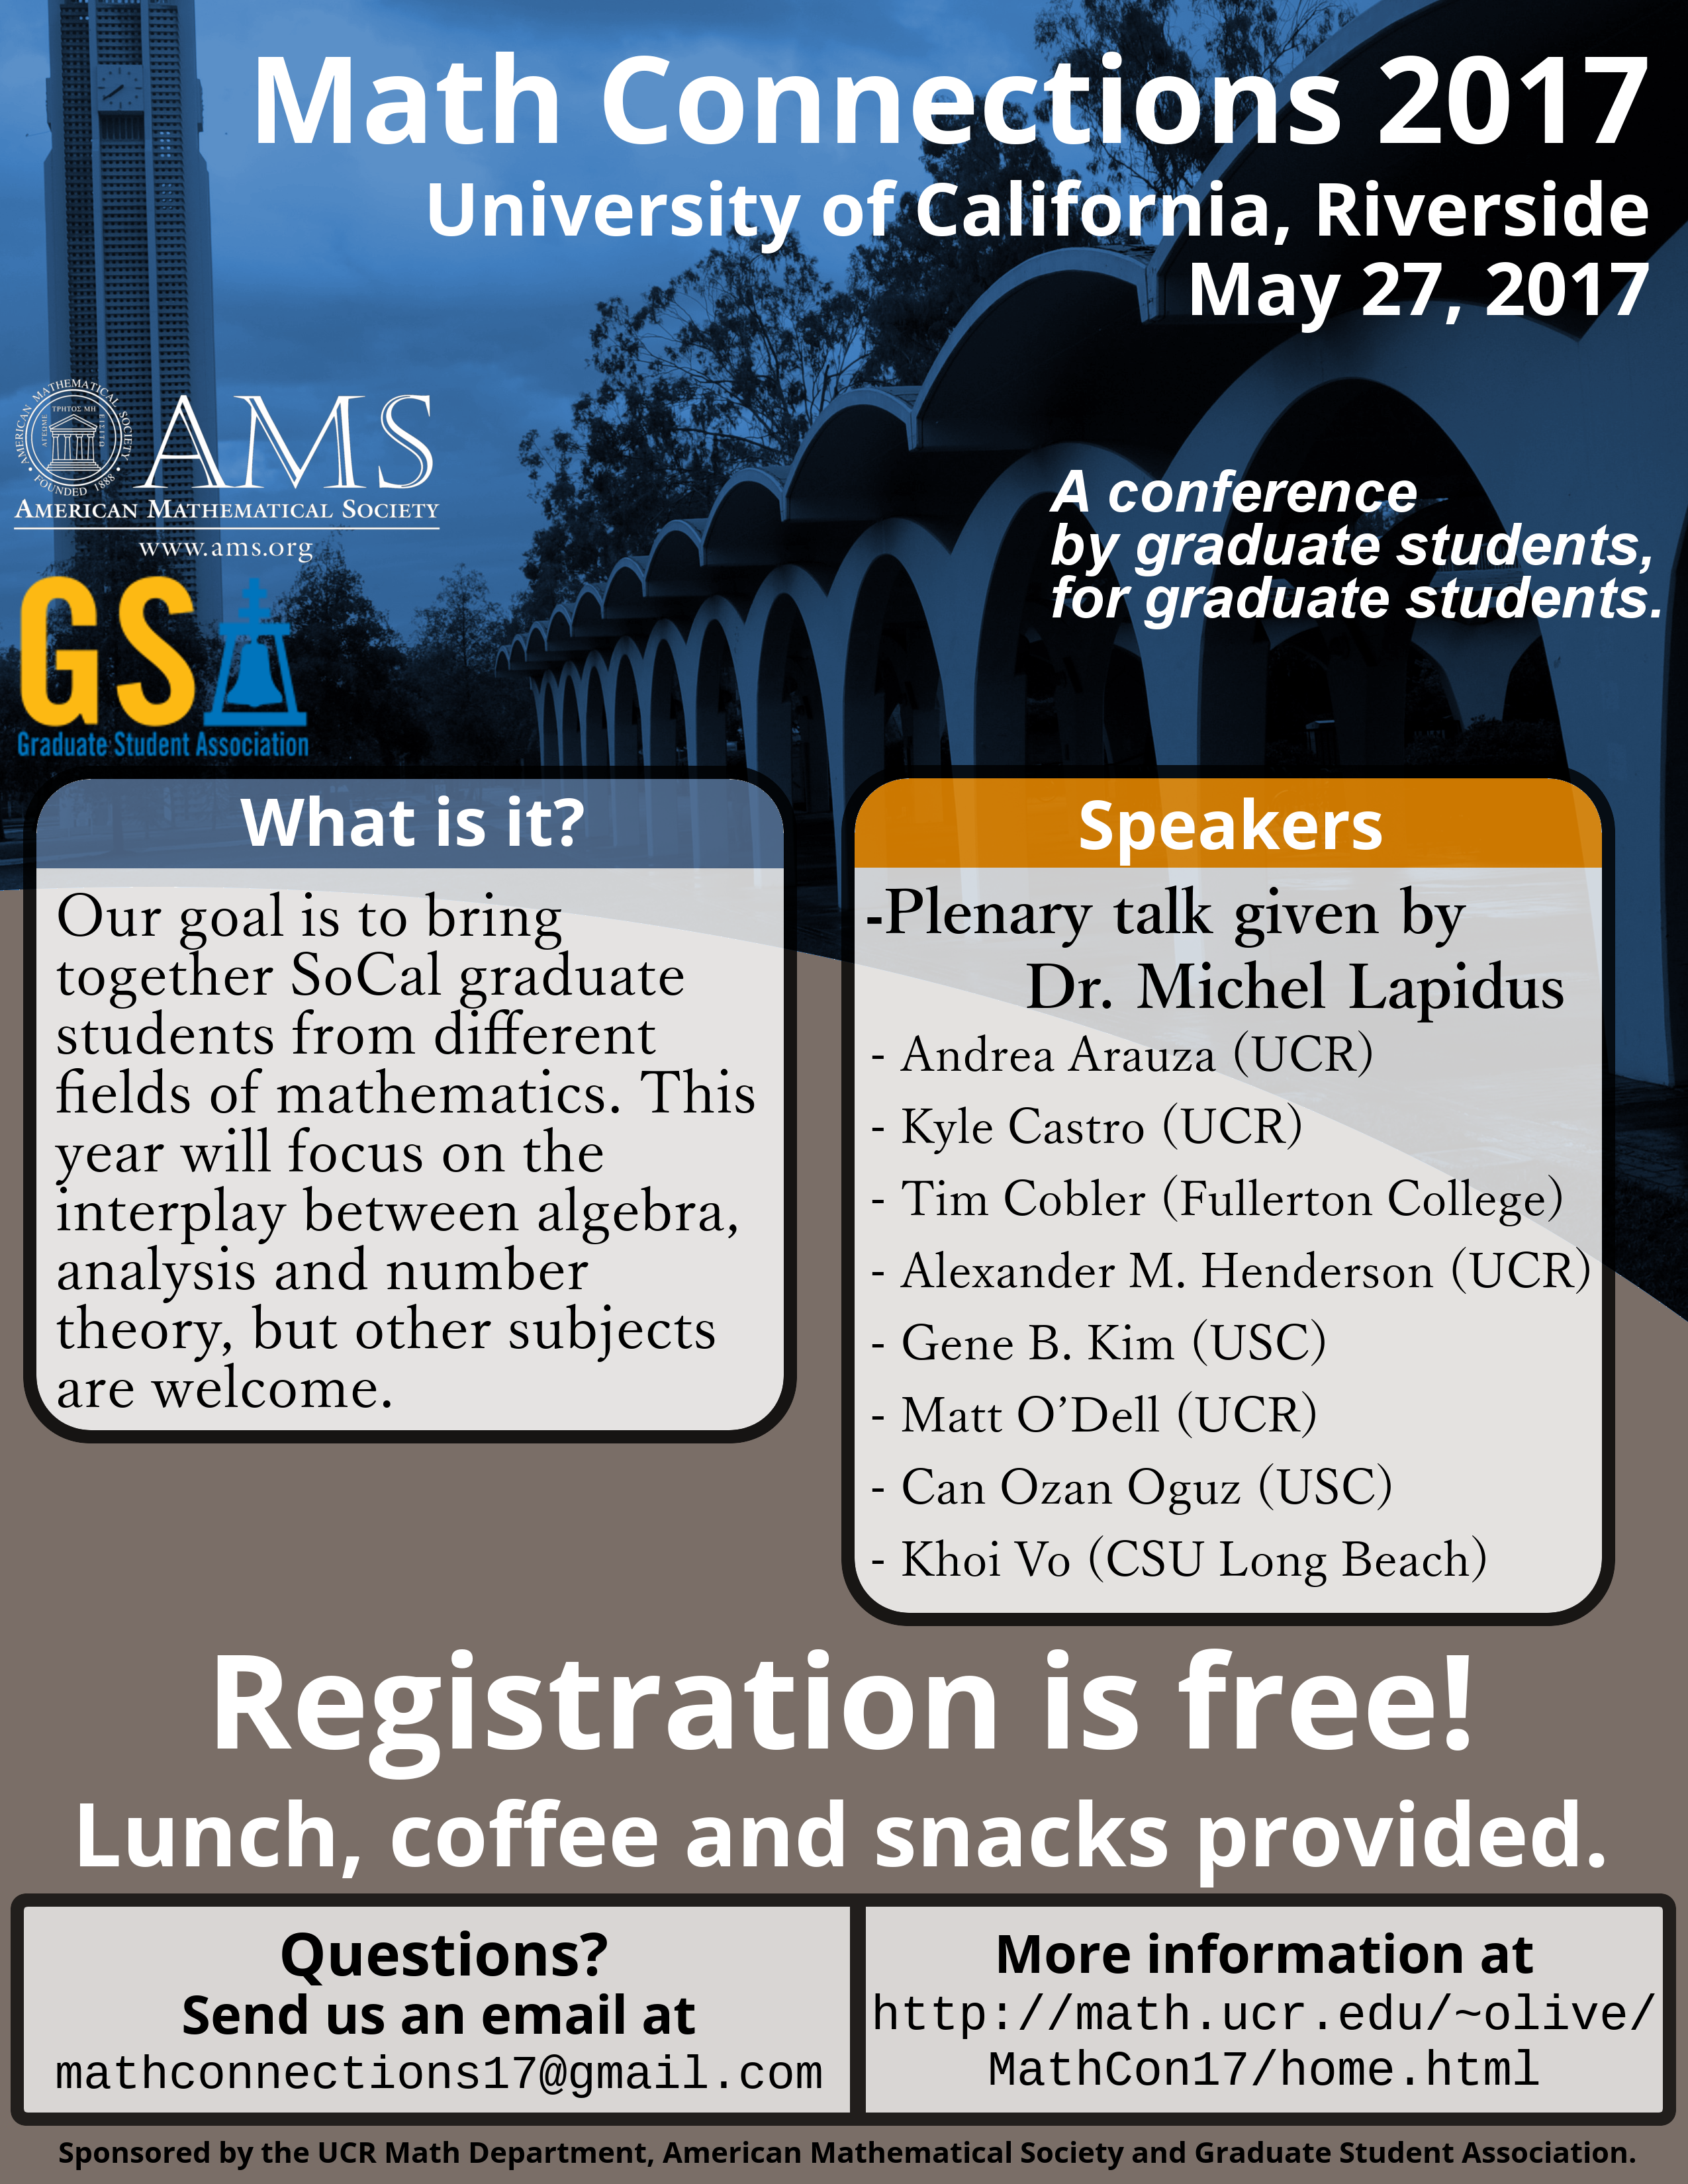 Come to UCR for our graduate student conference!